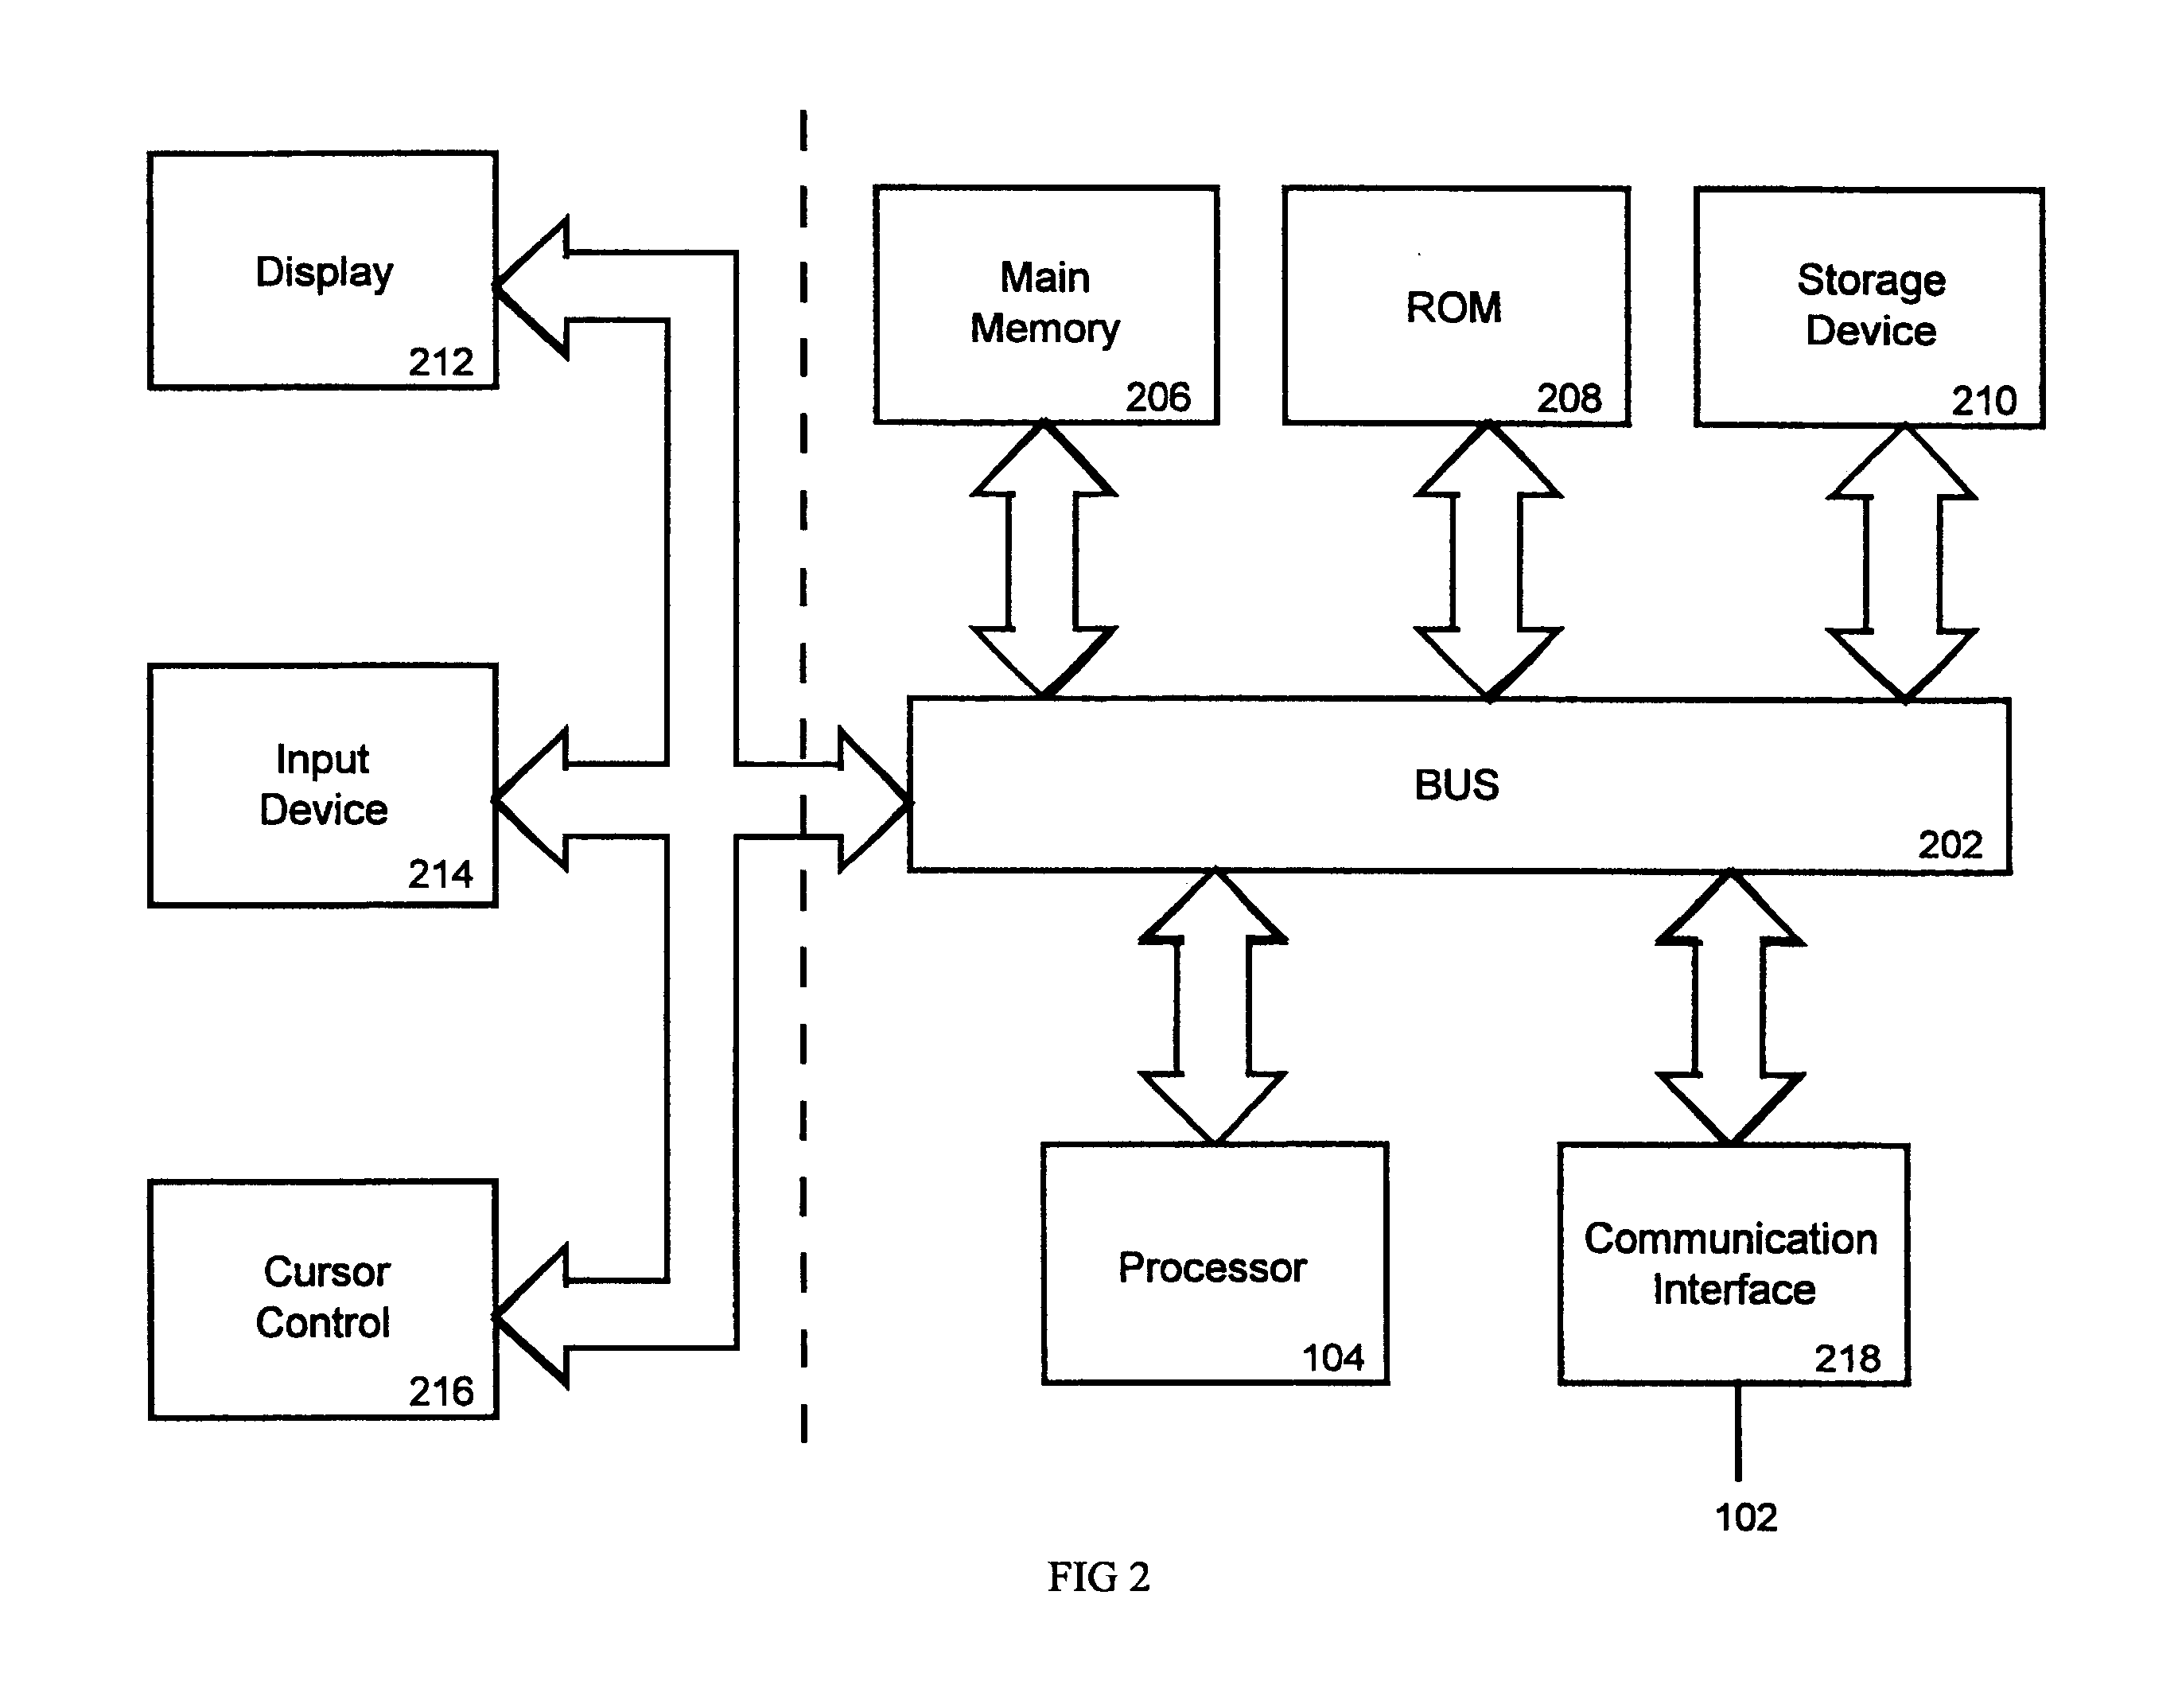 Method and system for detecting intrusion into and misuse of a data processing system